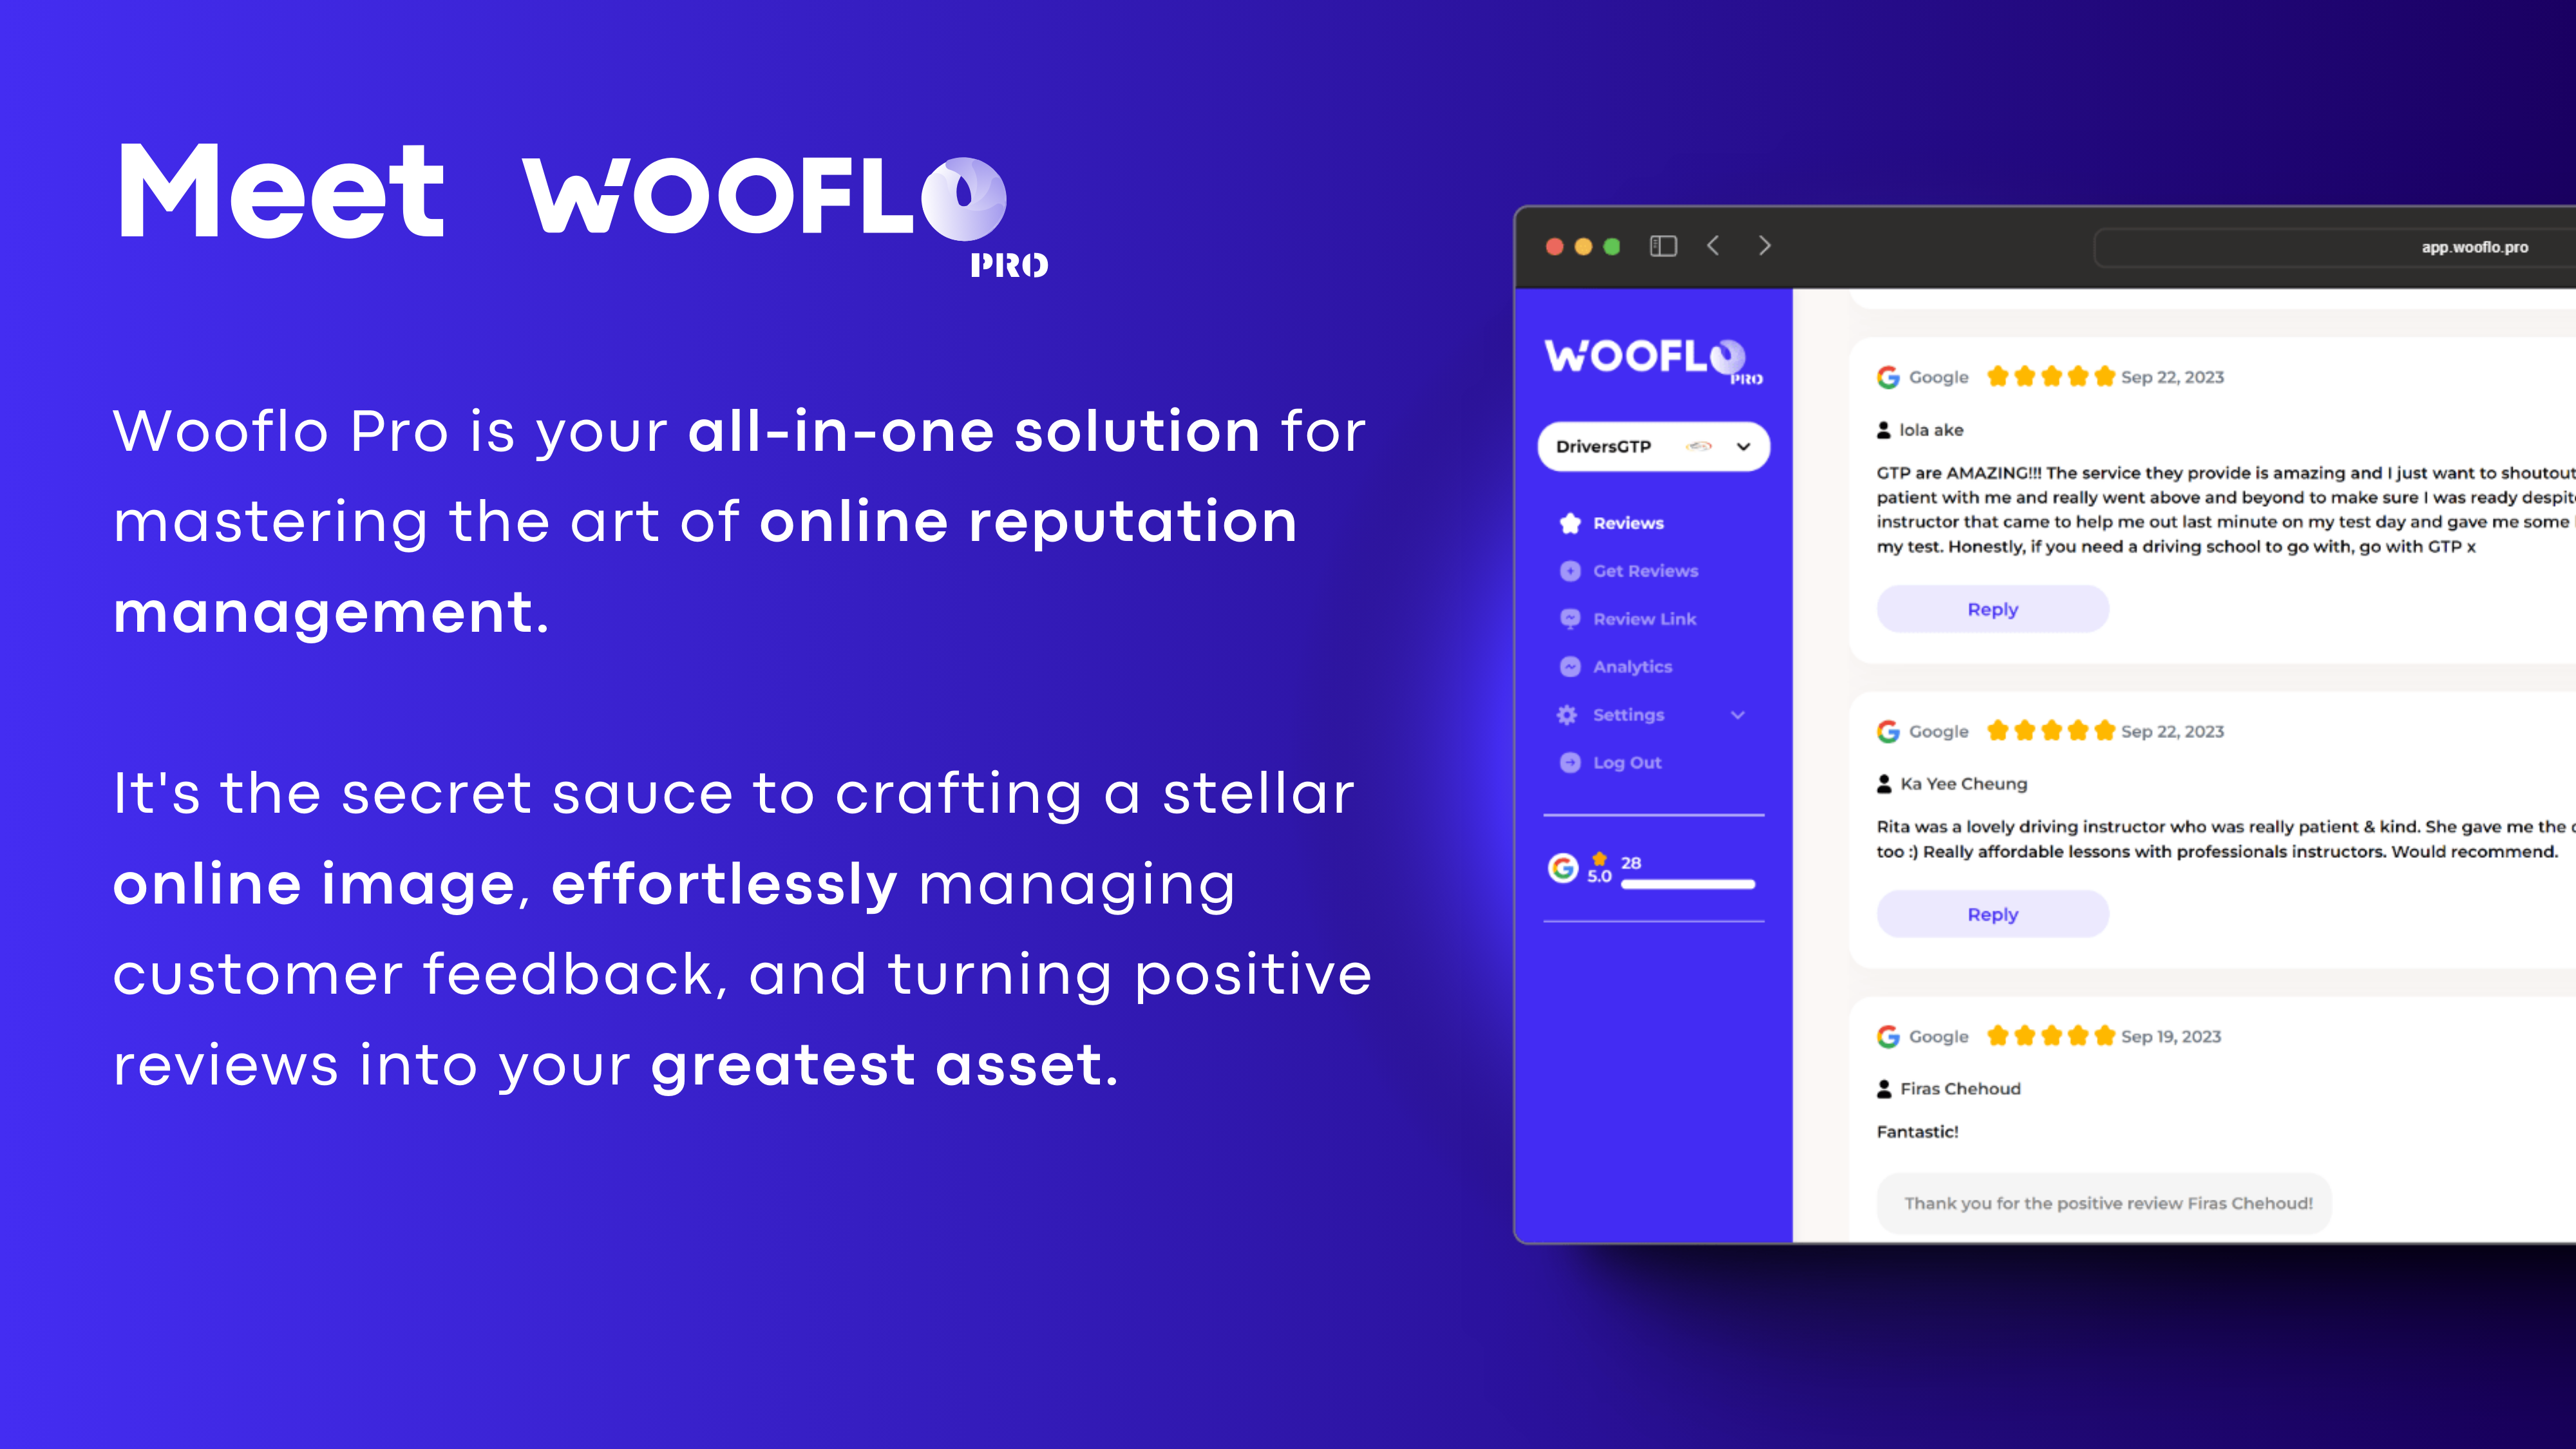 Wooflo Pro Bring in a fresh batch of customers straight from Google's doorstep!